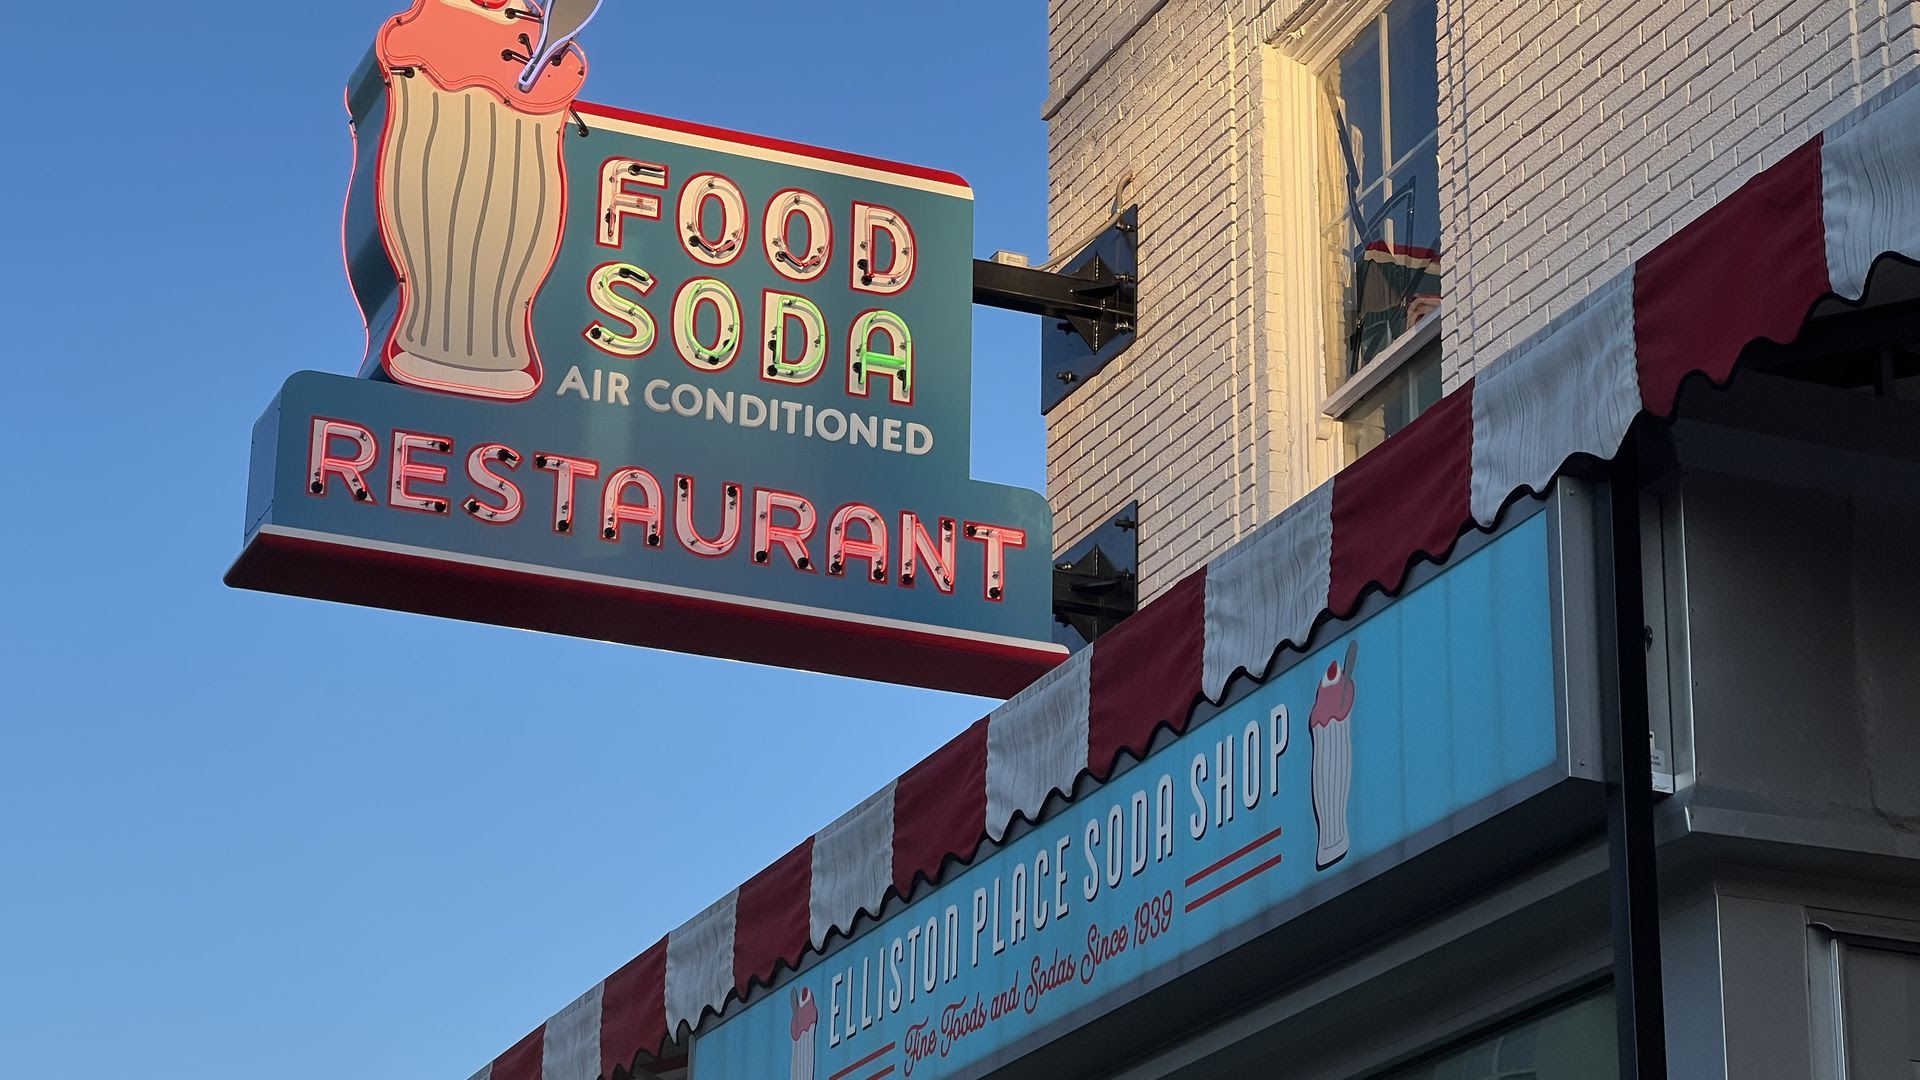 The exterior blue and pink sign of Elliston Place Soda Shop in Nashville.